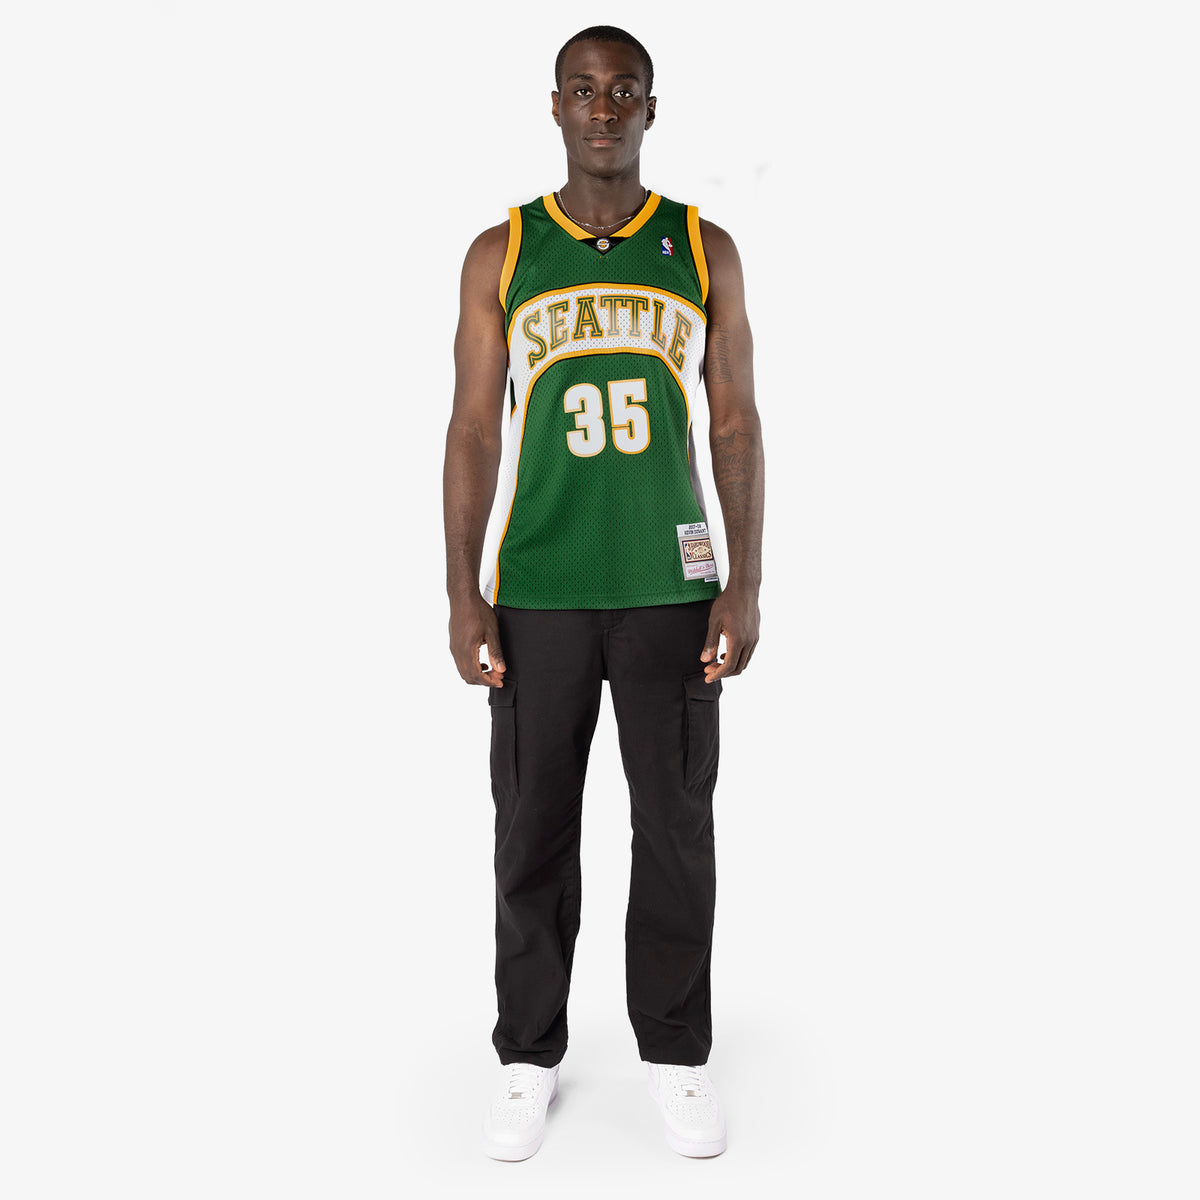 Mitchell & Ness Kevin Durant Youth Green Jersey, Medium (10/12)